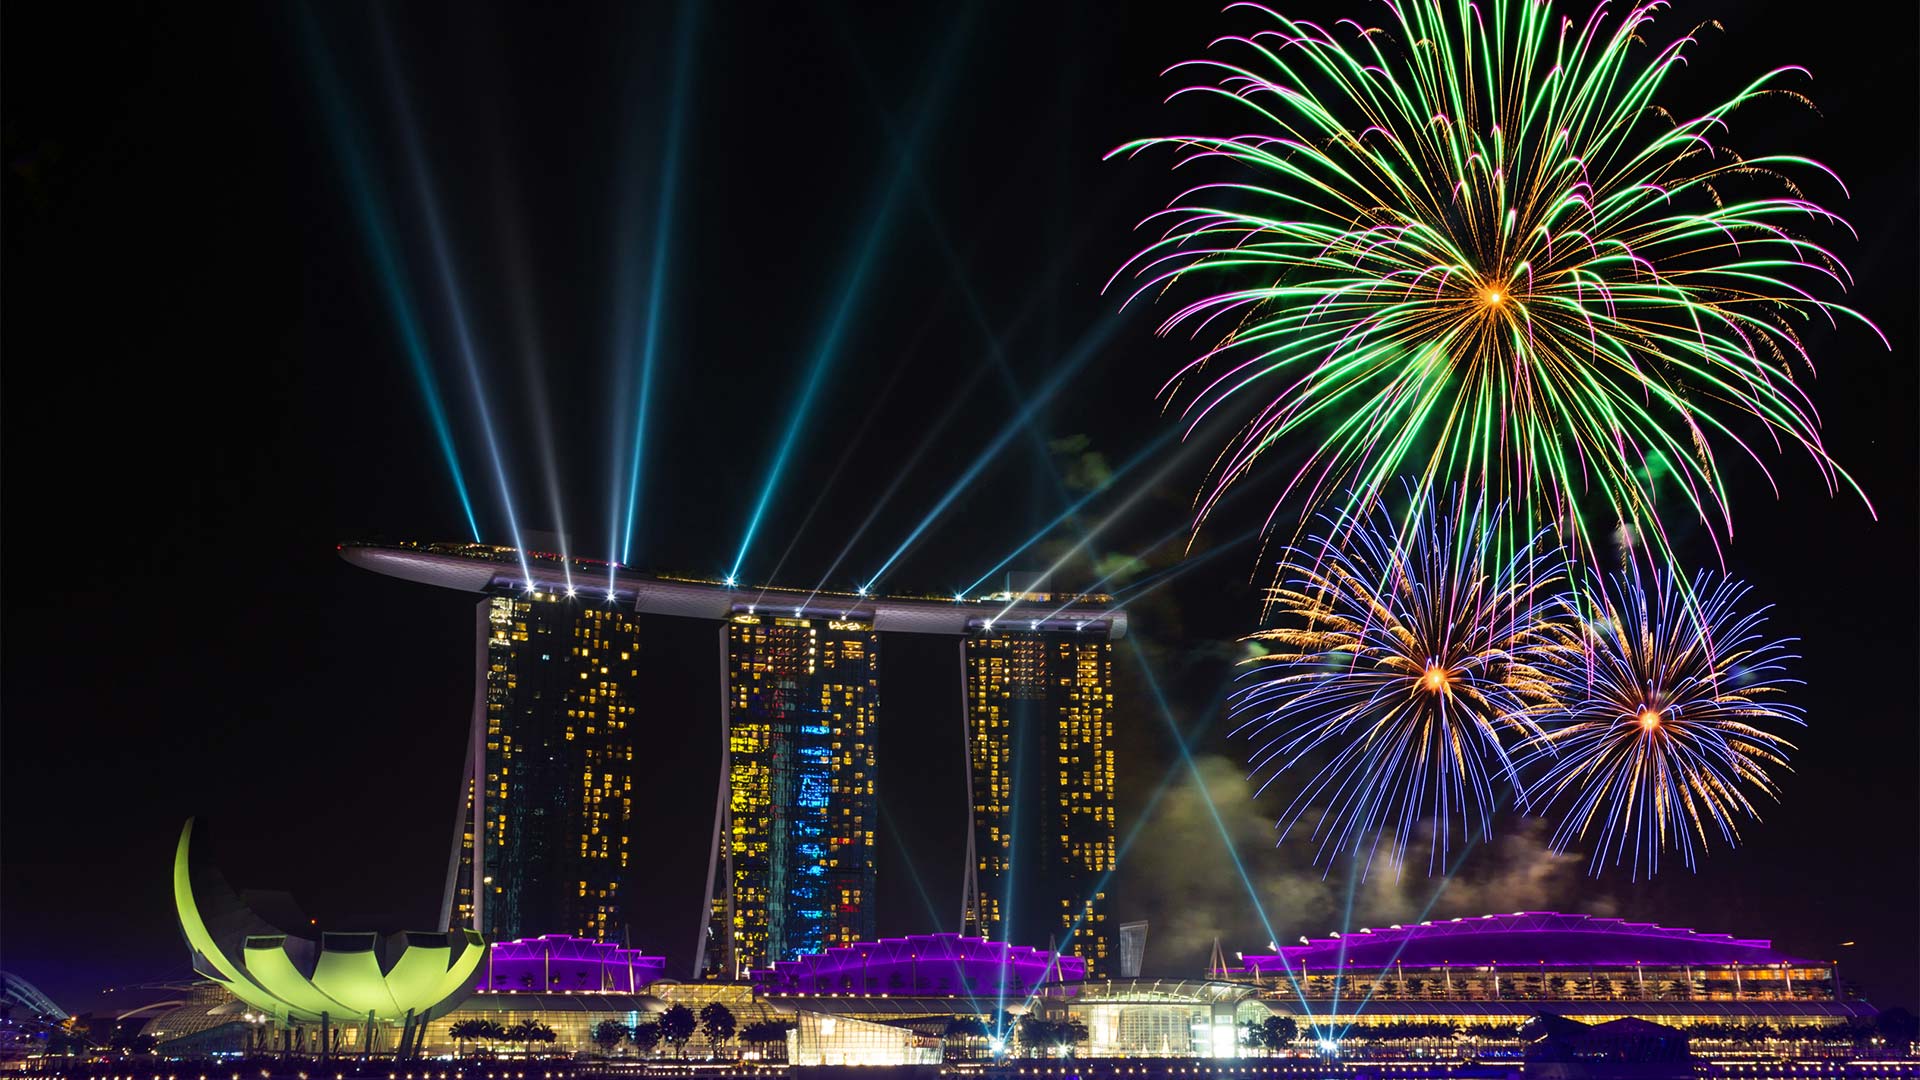 National Day fireworks in Singapore viewed from the rooftop of Marina Bay Sands